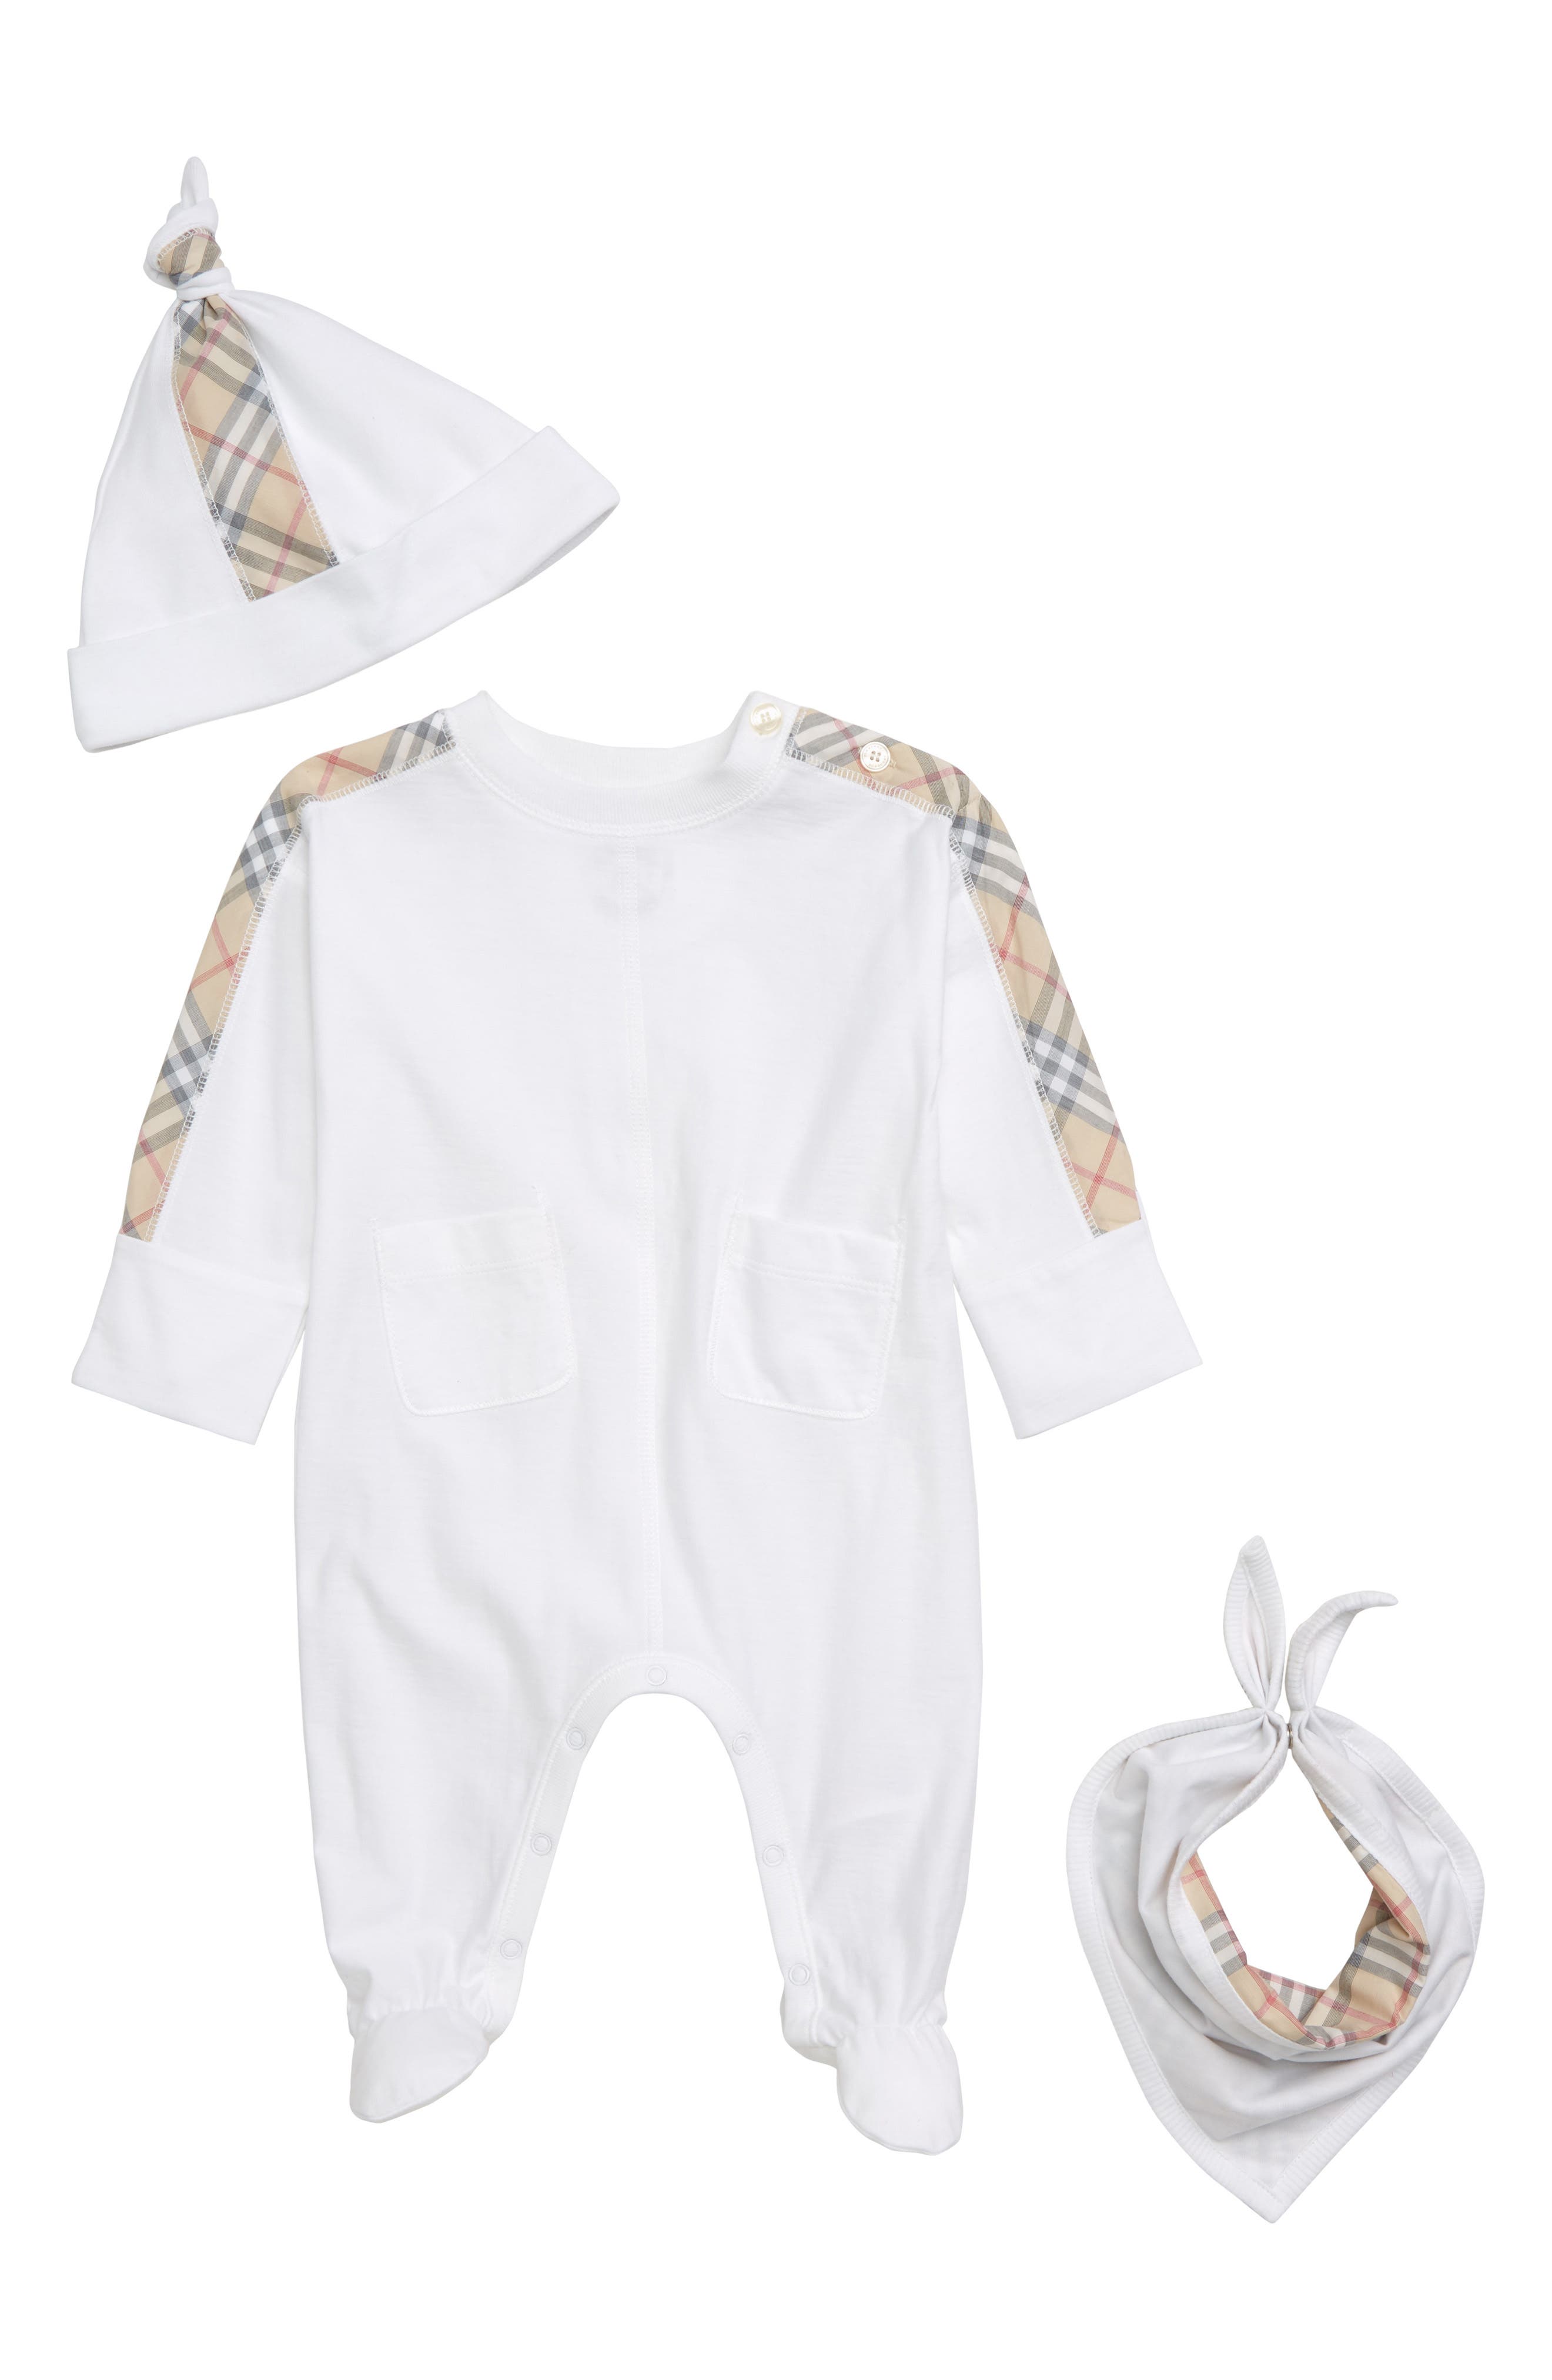 burberry newborn outfit